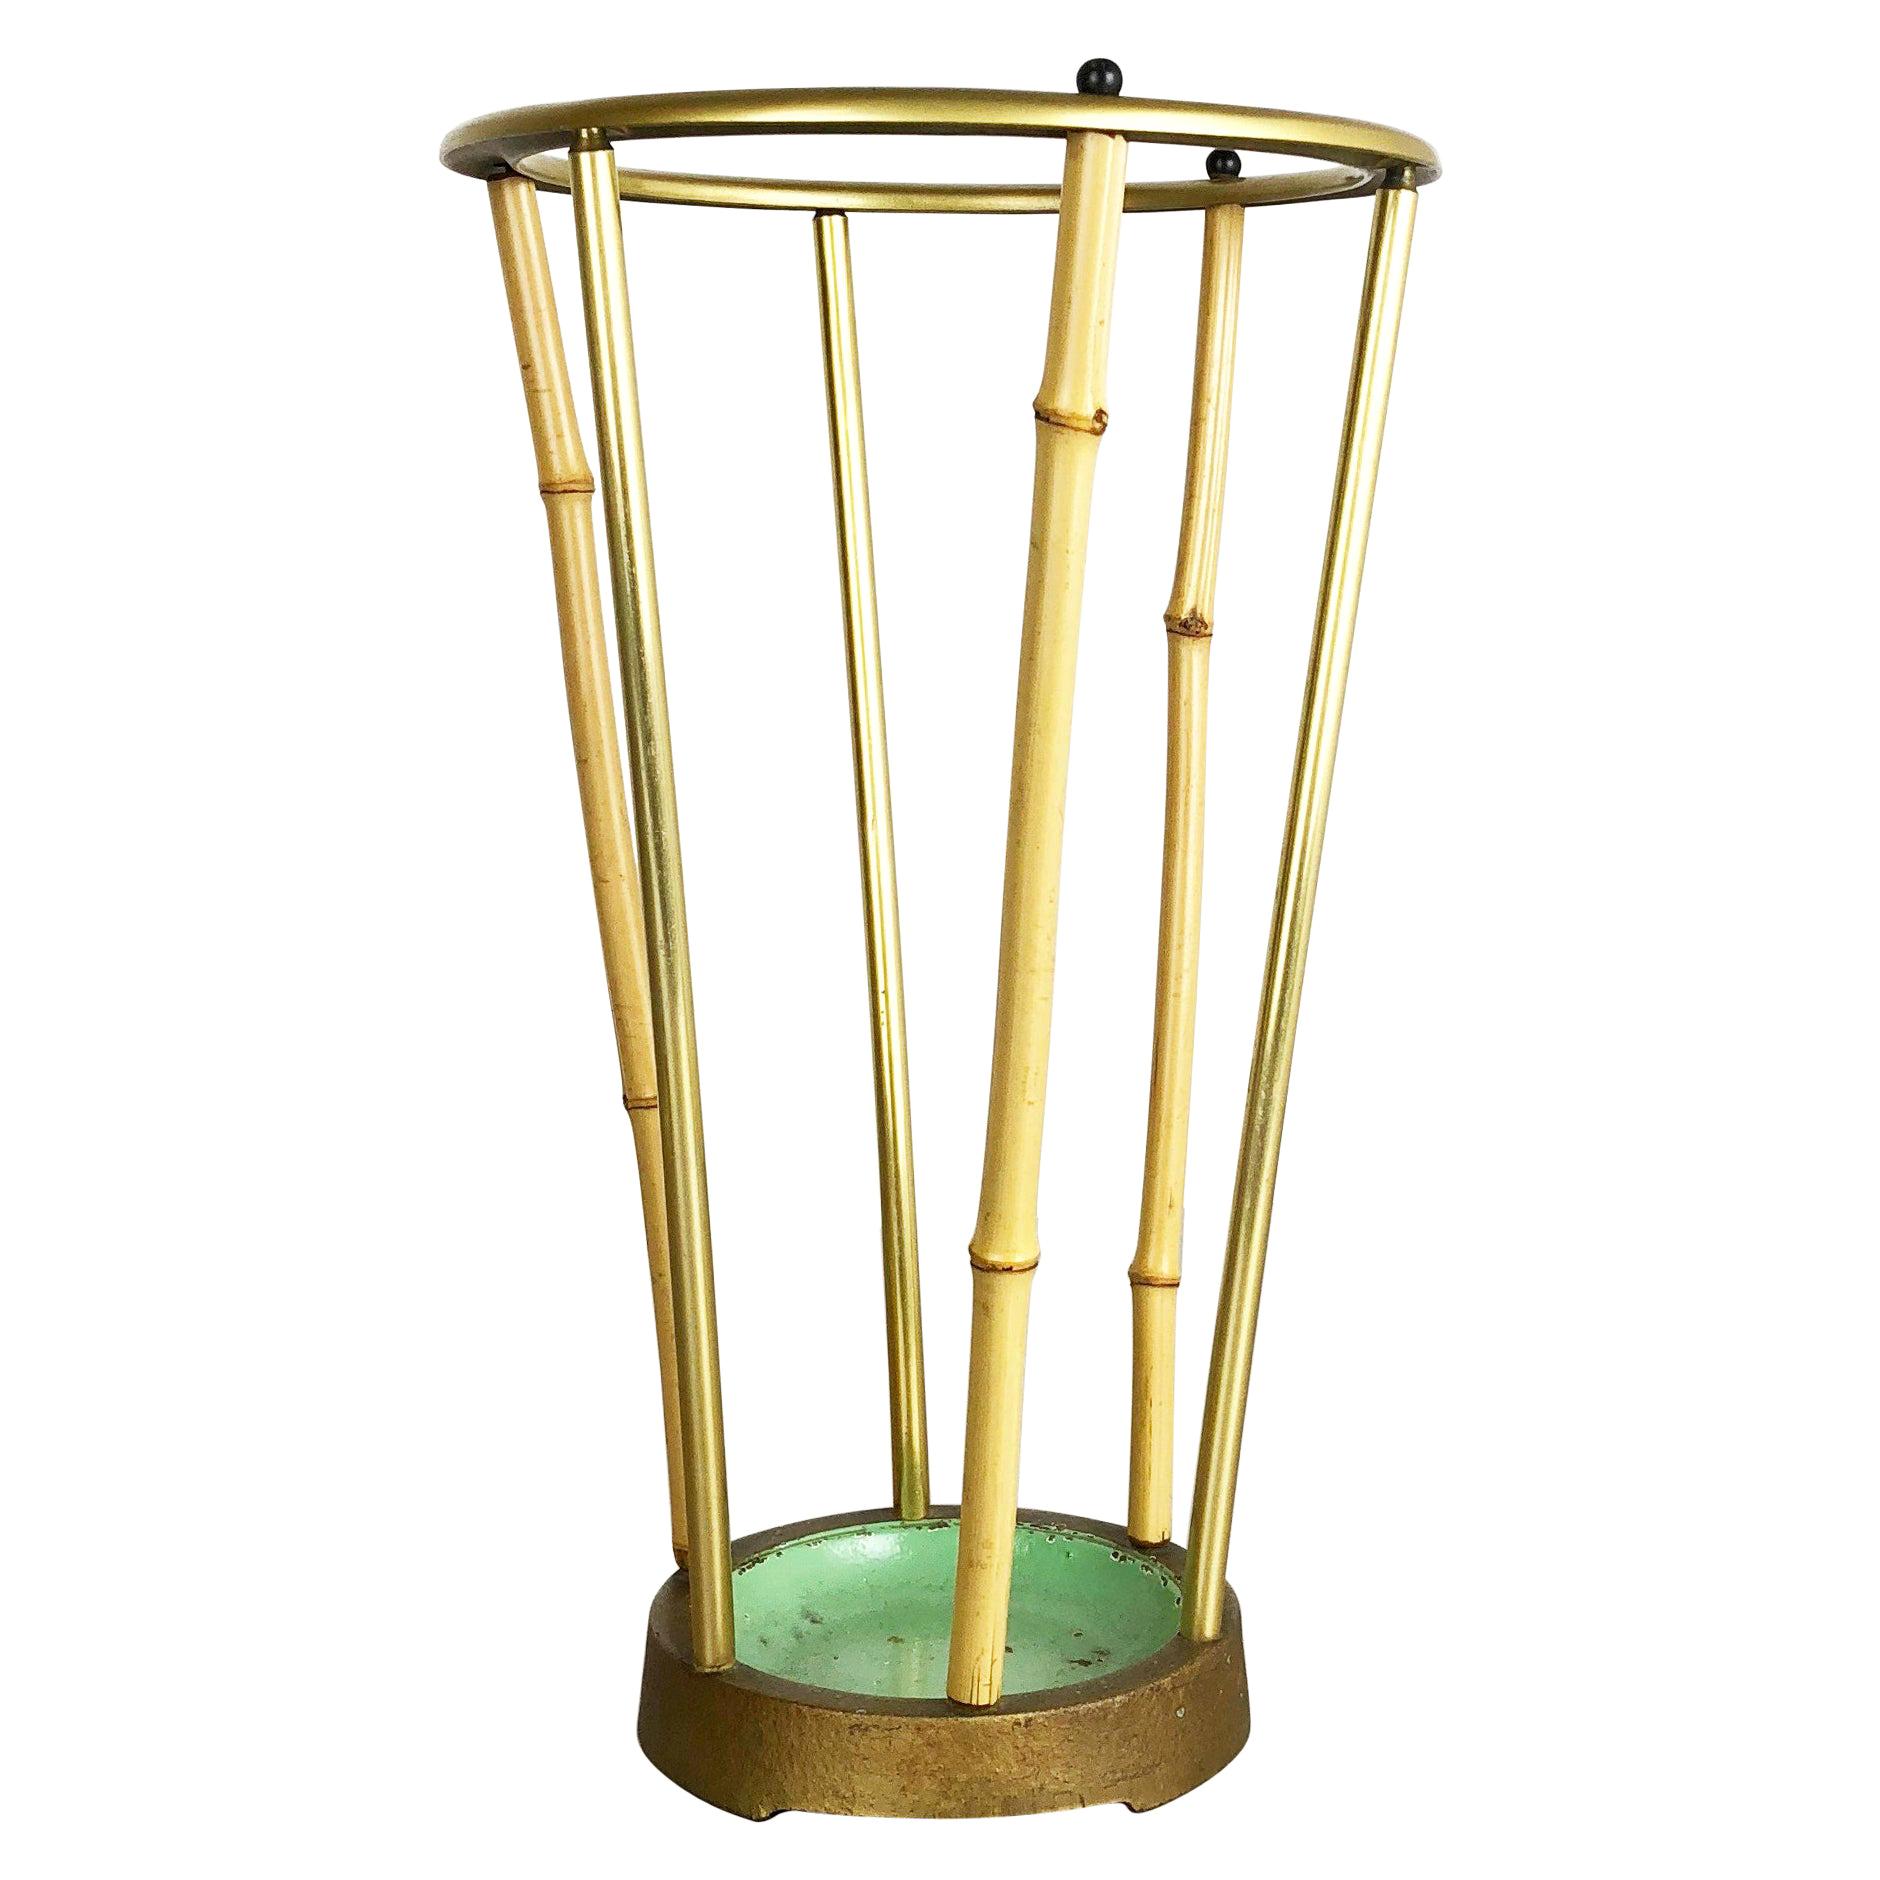 Midcentury Metal Brass and Bamboo Auböck style Umbrella Stand, Germany, 1950s